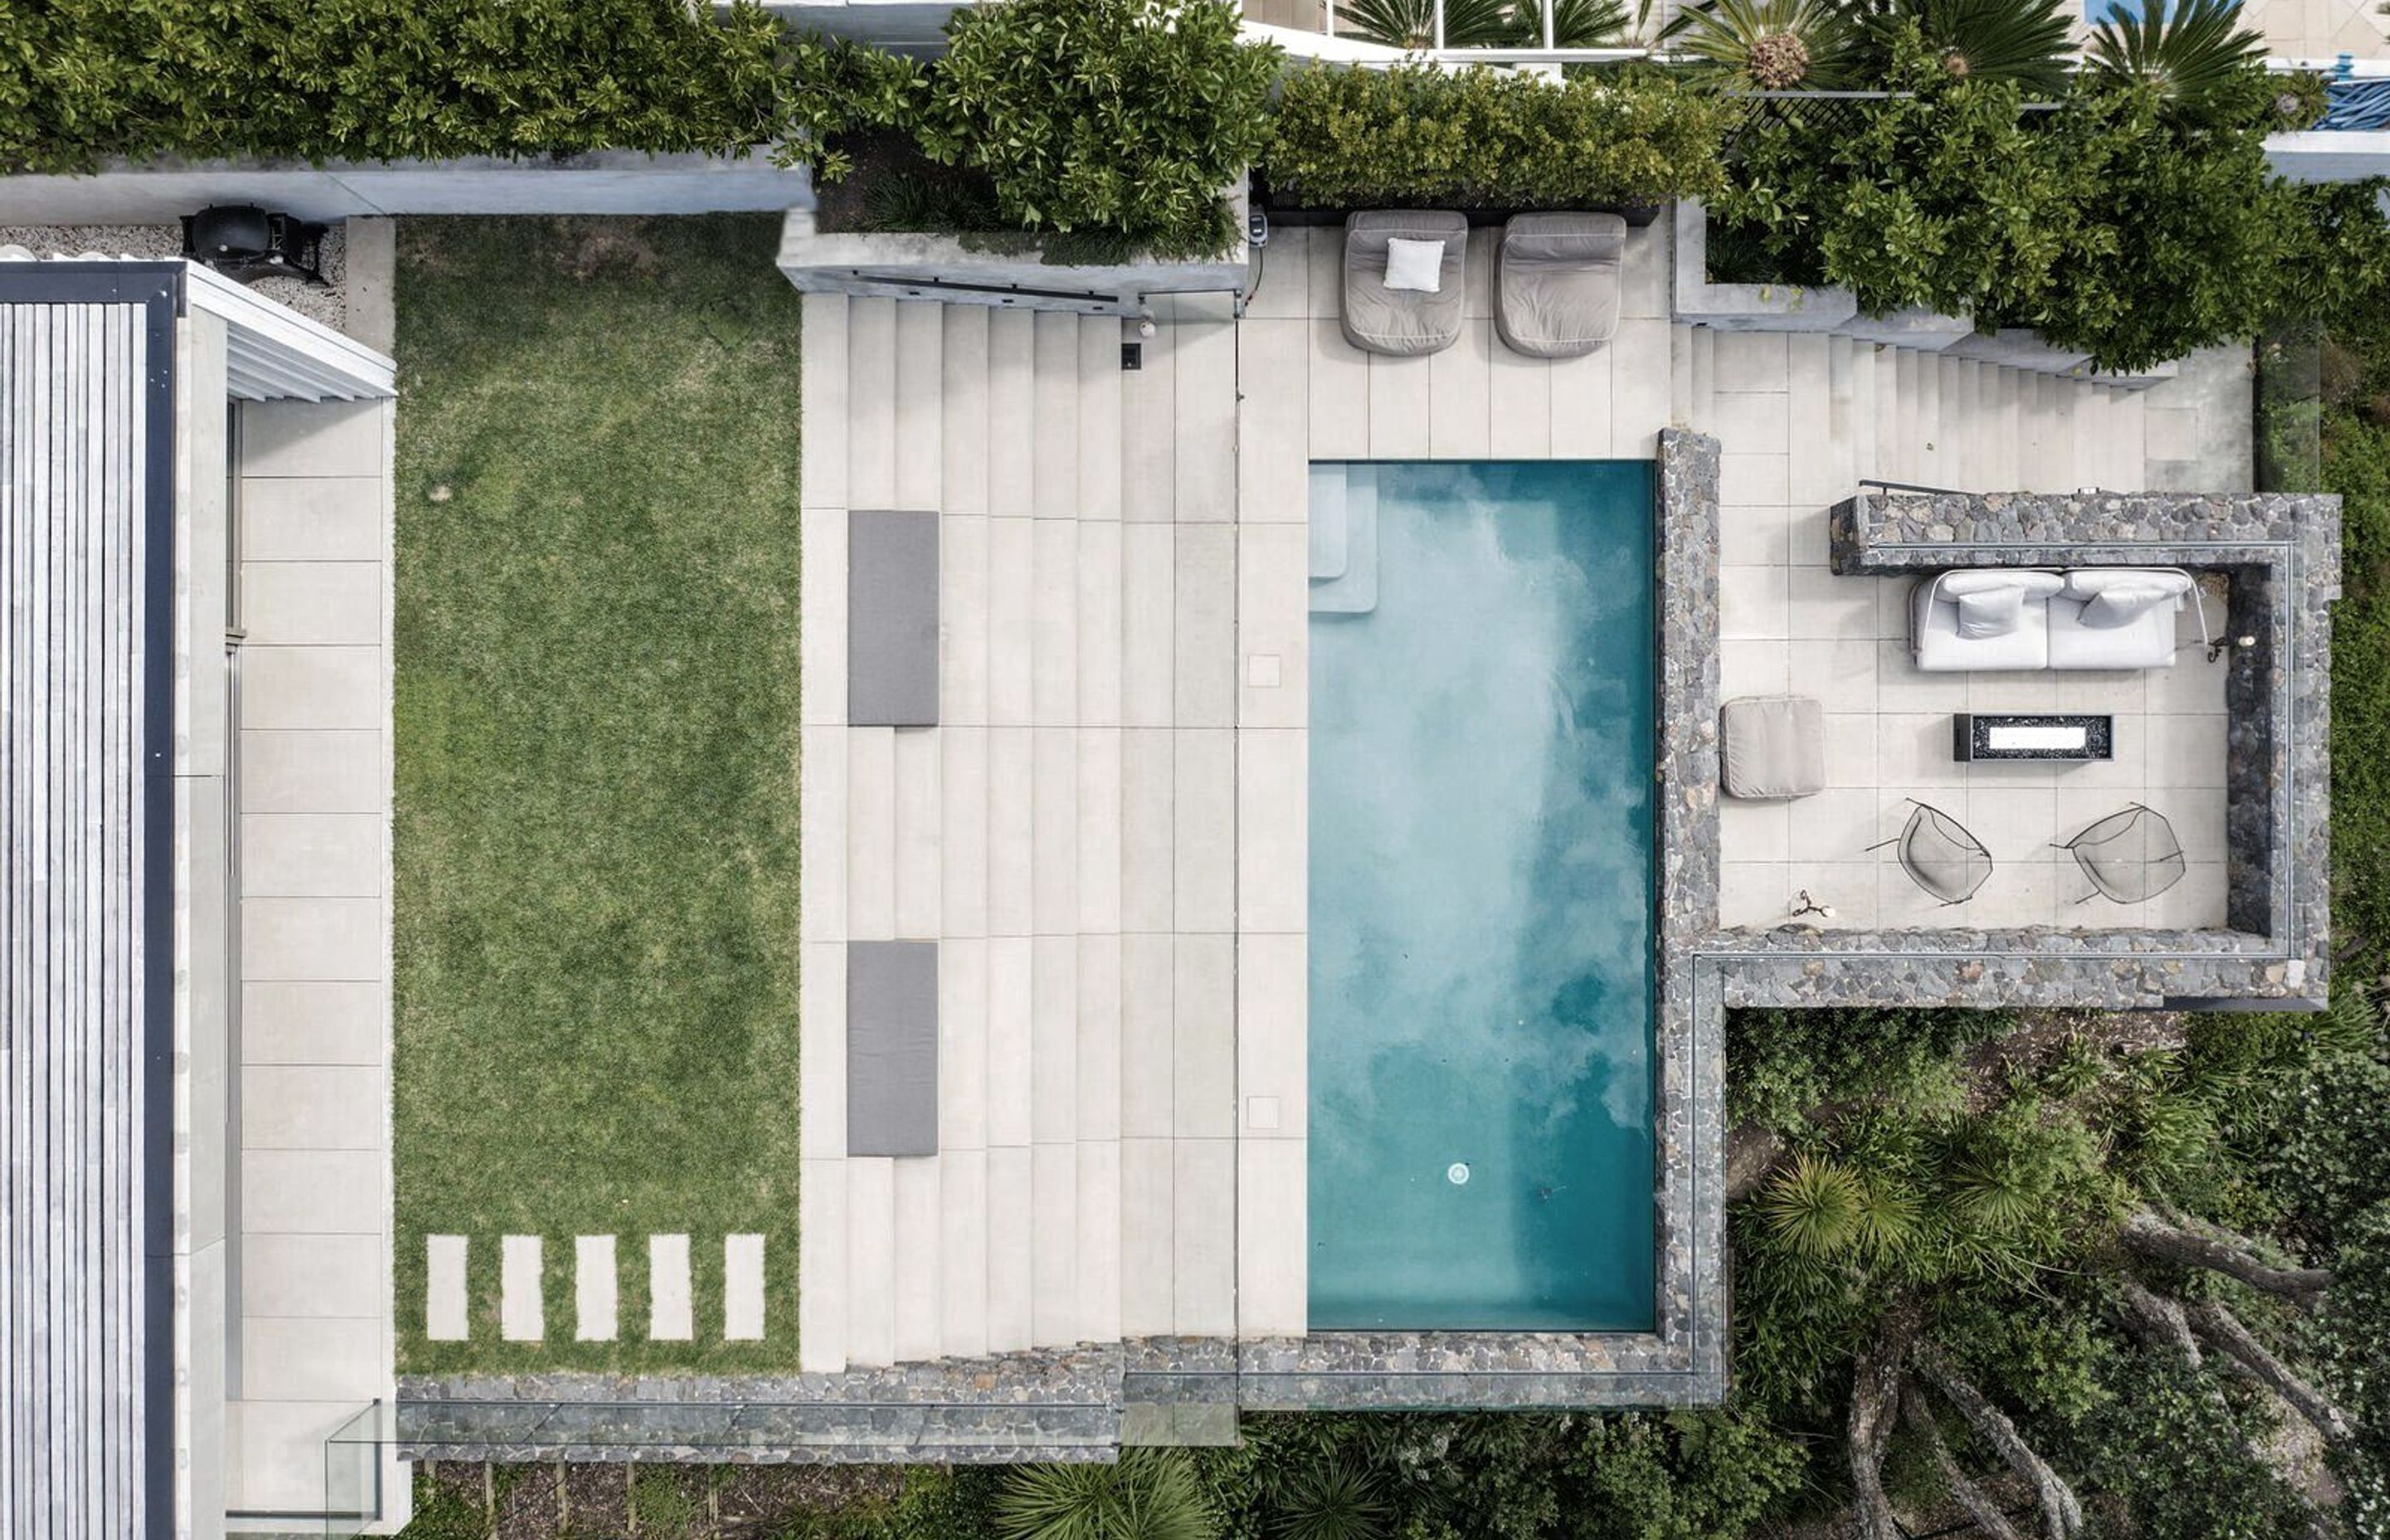 The site plan shows how basalt stone walls form terraces all the way up the steep site, which "creates solidity and nestles the house into the coast and into the water’s edge,” says Andrew Patterson.